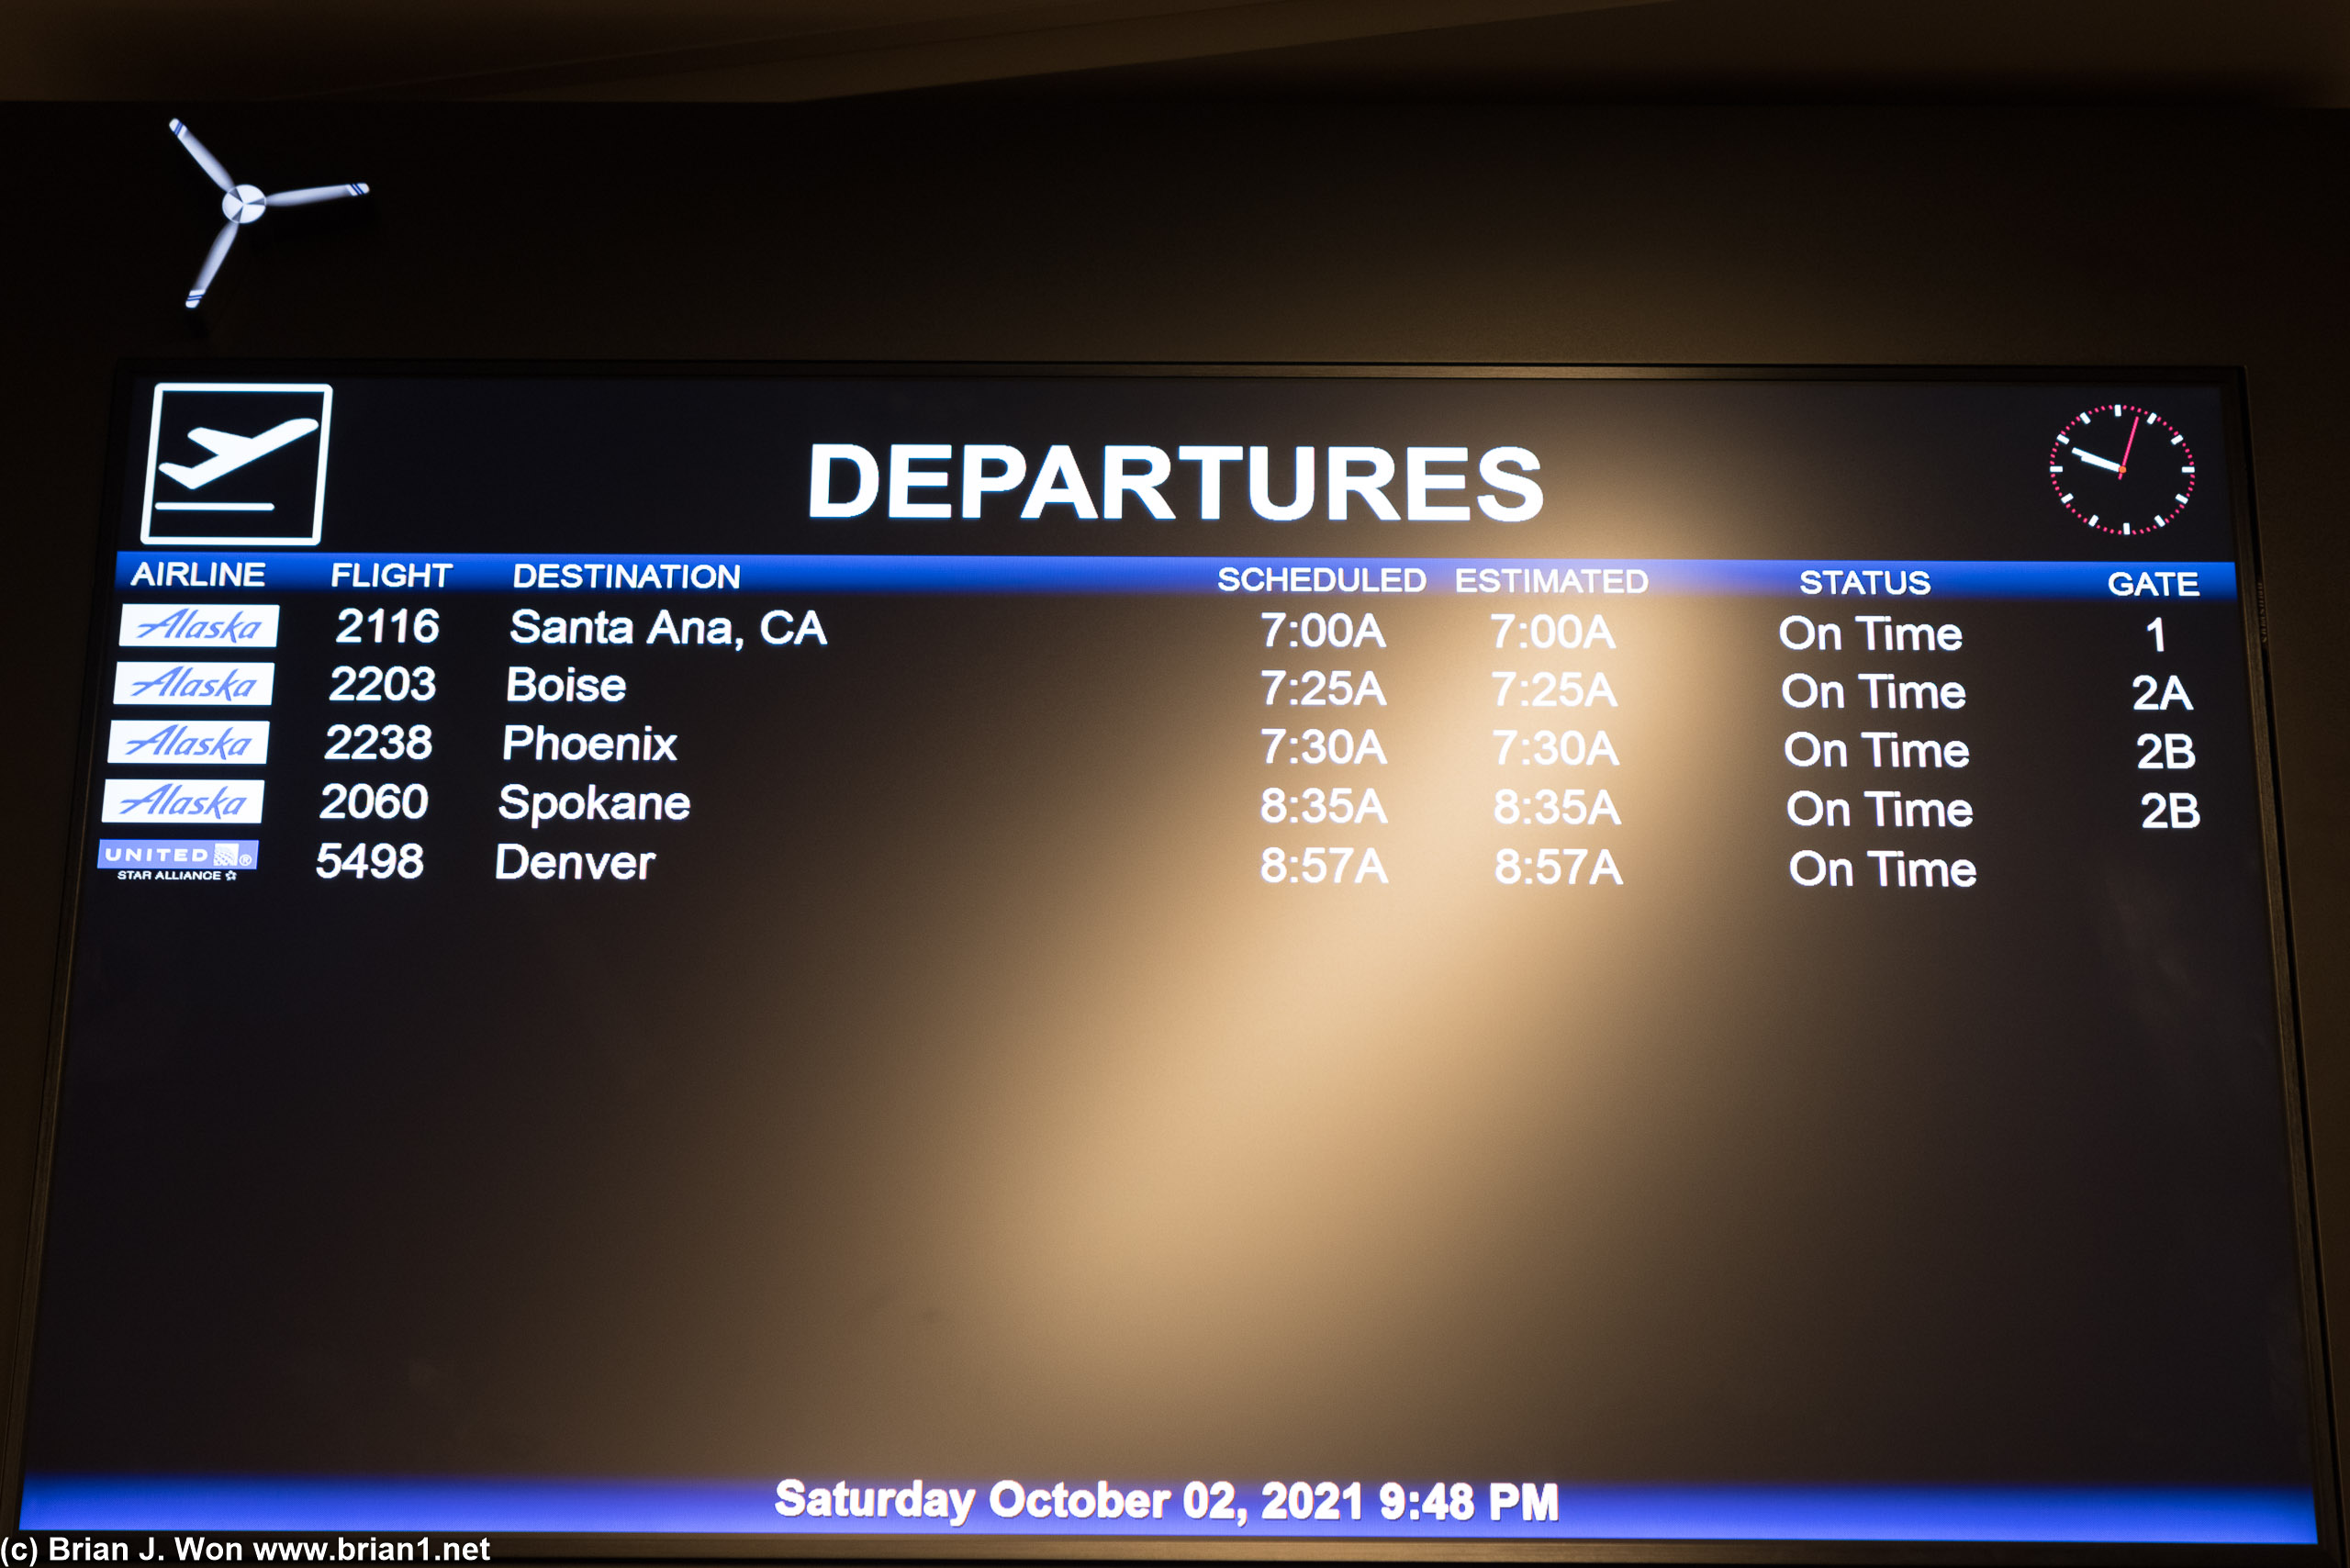 Tomorrow's departures. Not many. (unsure if it's all day or just the morning...)